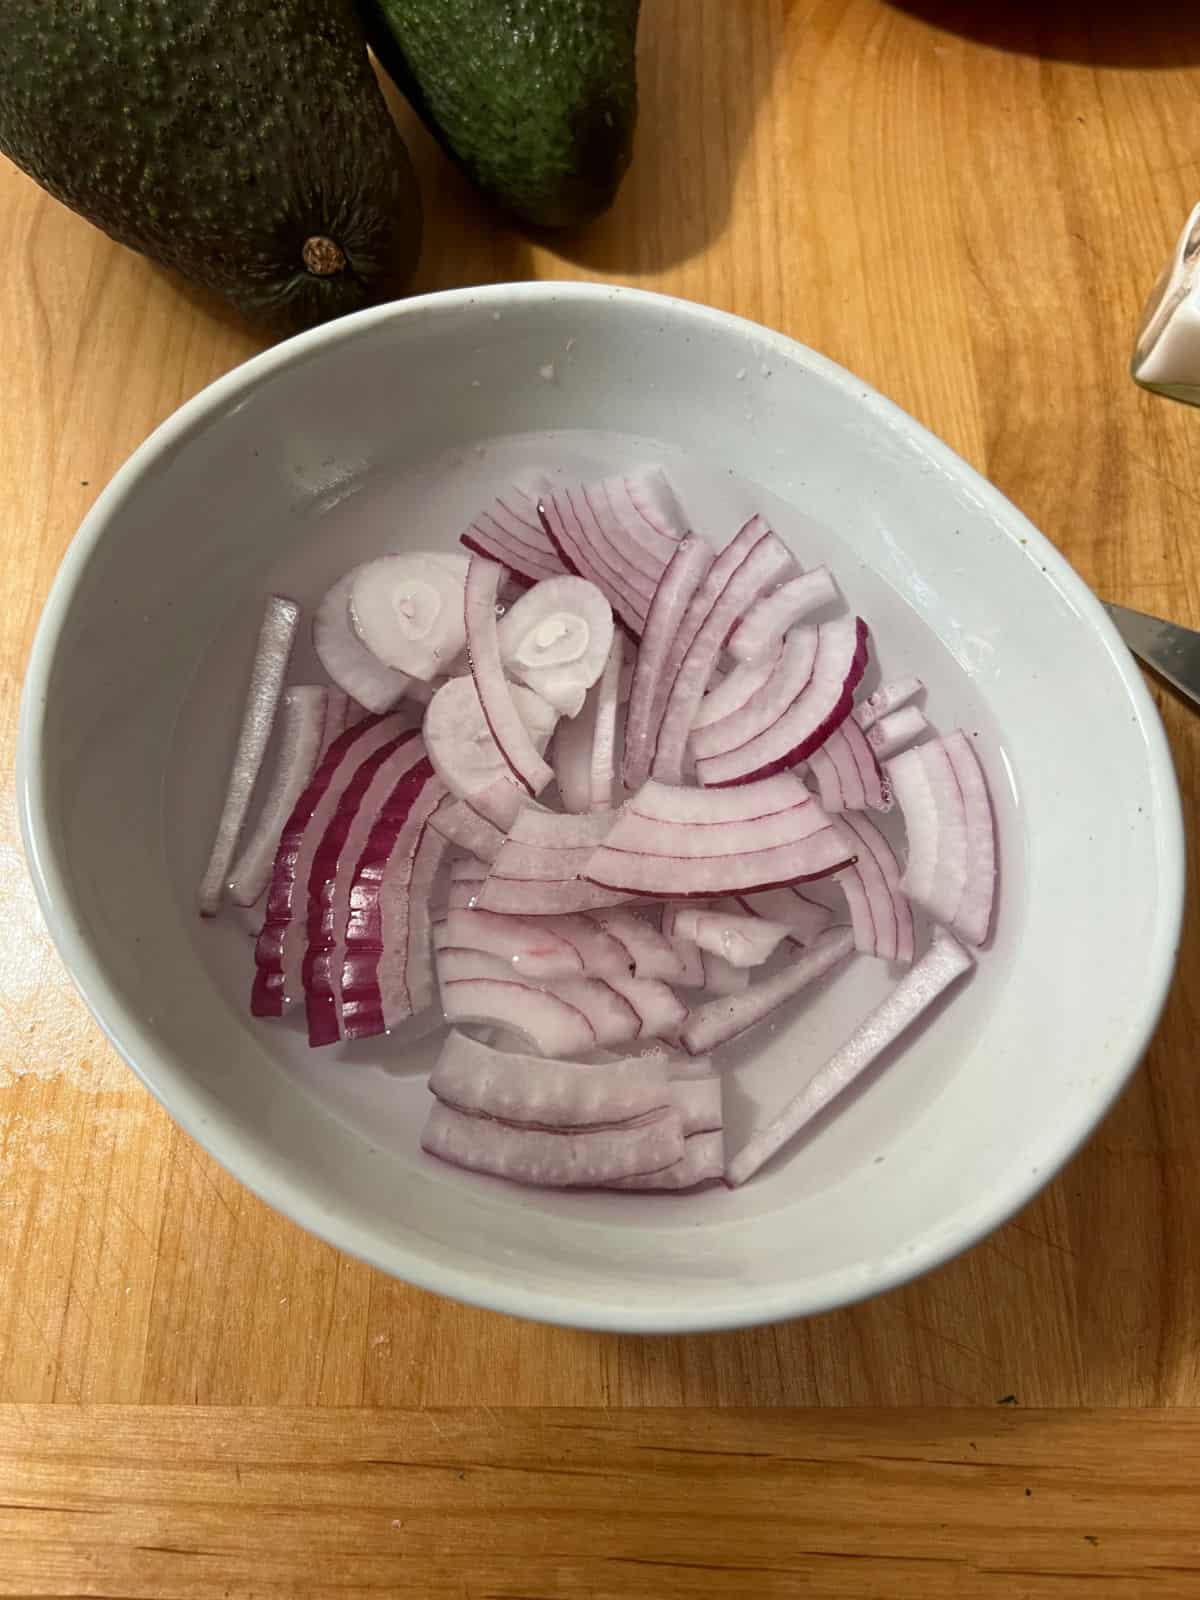 onion slices soaking in water.